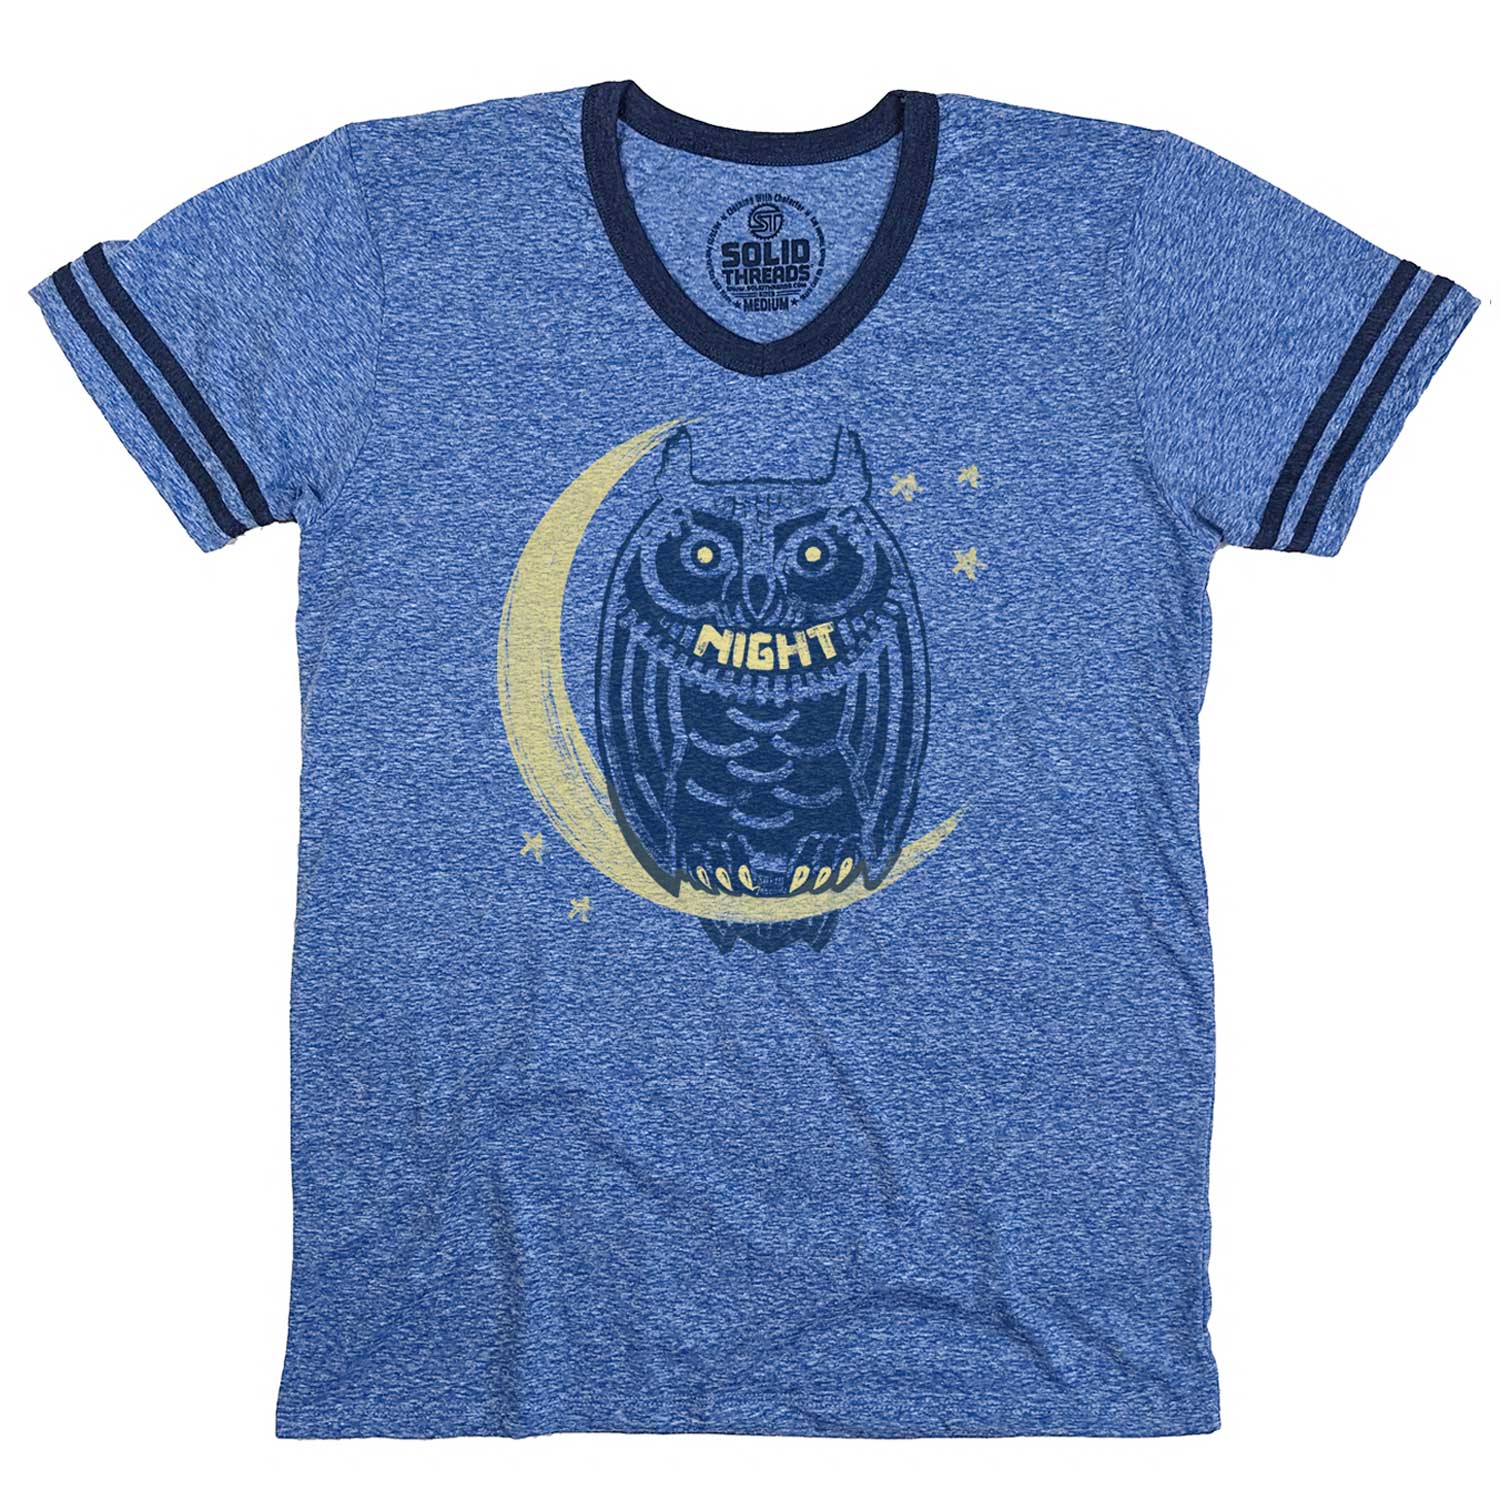 Men's Night Owl Vintage Graphic V-Neck Tee | Cool Owl T-shirt | Solid Threads